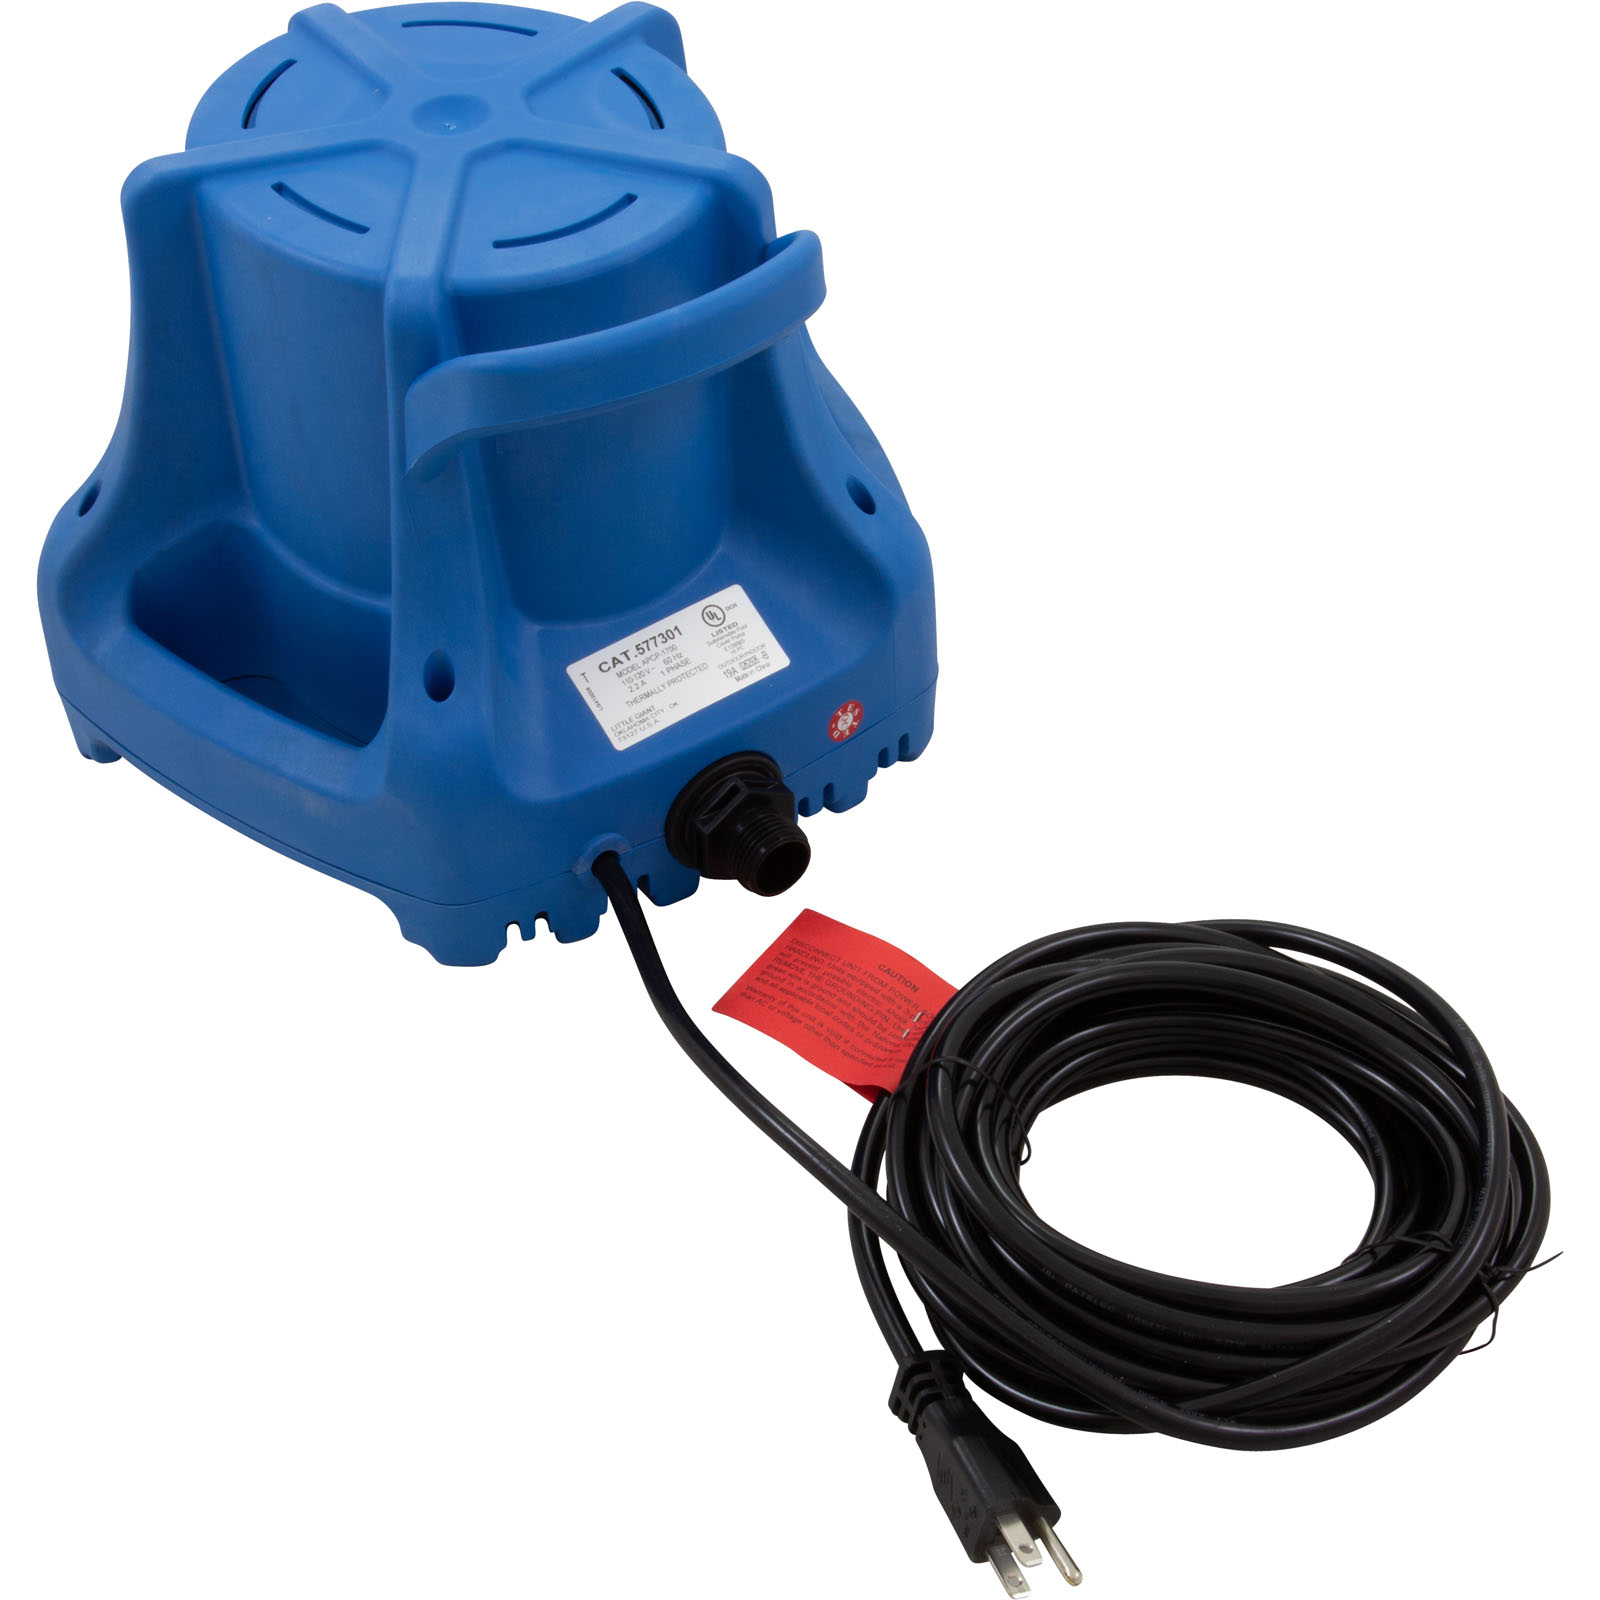 Picture of 577301 Pump Submersible Little Giant 1700 GPH 270w 25' Cord